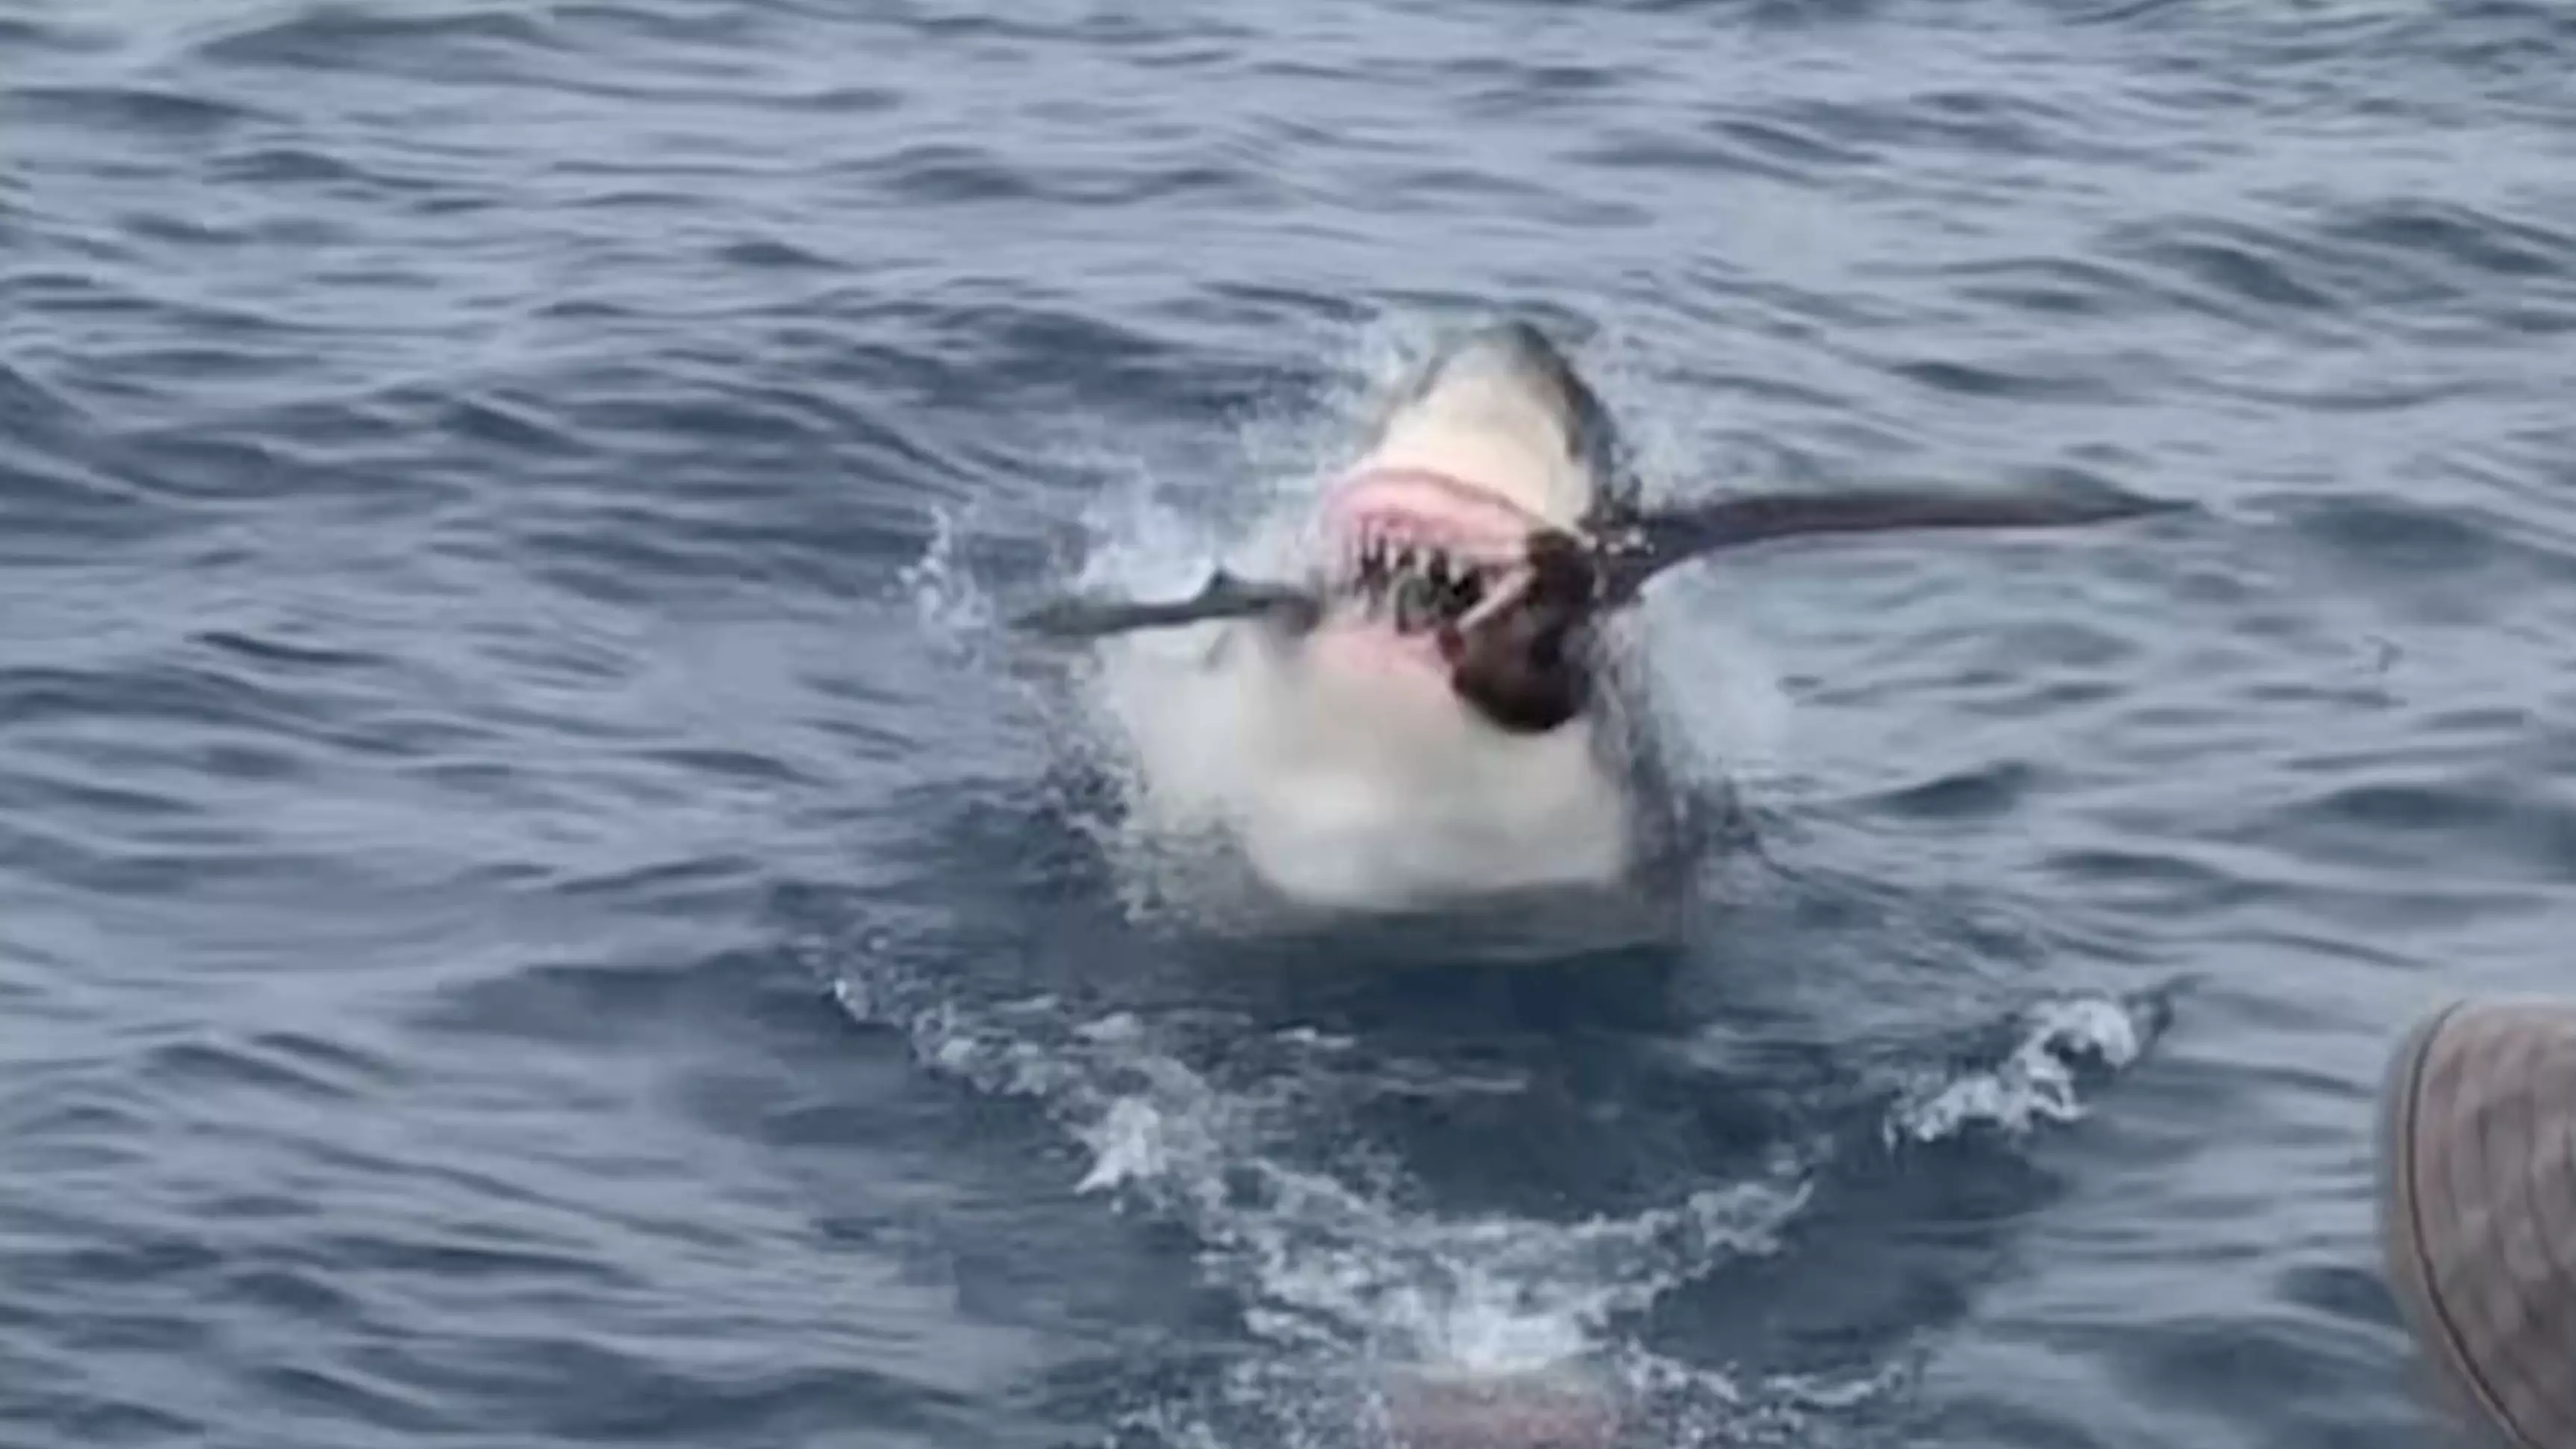 Tourists Blown Away As Great White Shark Suddenly Strikes And Swallows Bird Whole